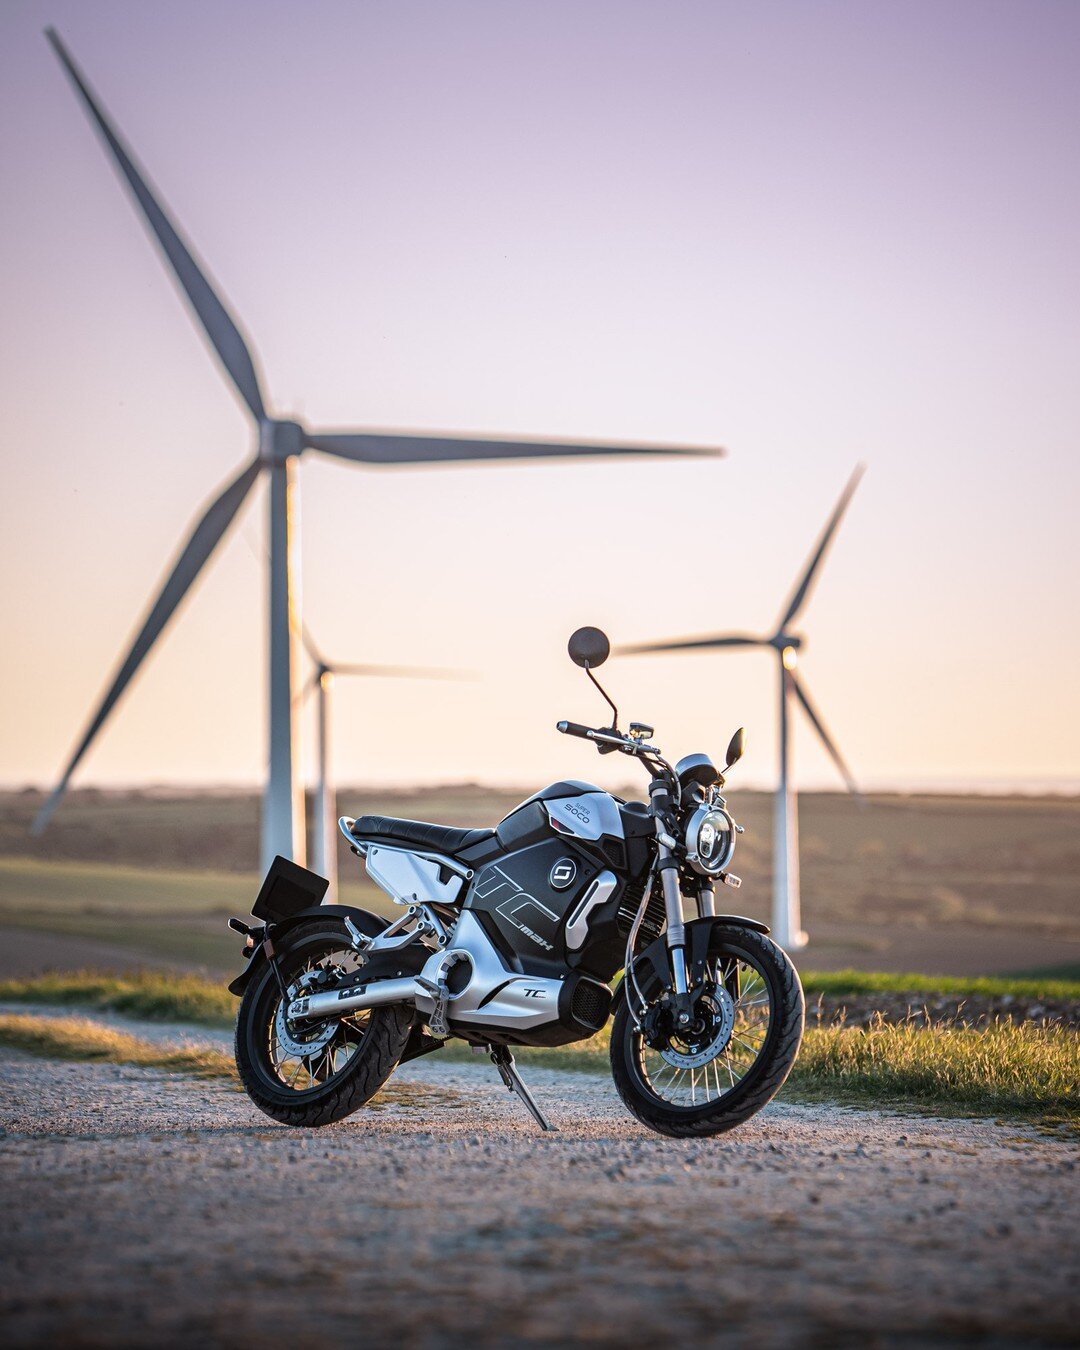 ⚡🏍♻️✅ I was really stoked with this shoot, taking the fully electric Super Soco TC Max, as a less polluting form of transportation with the backdrop of a wind farm, to highlight just how much more environmentally friendly they are when compared to t